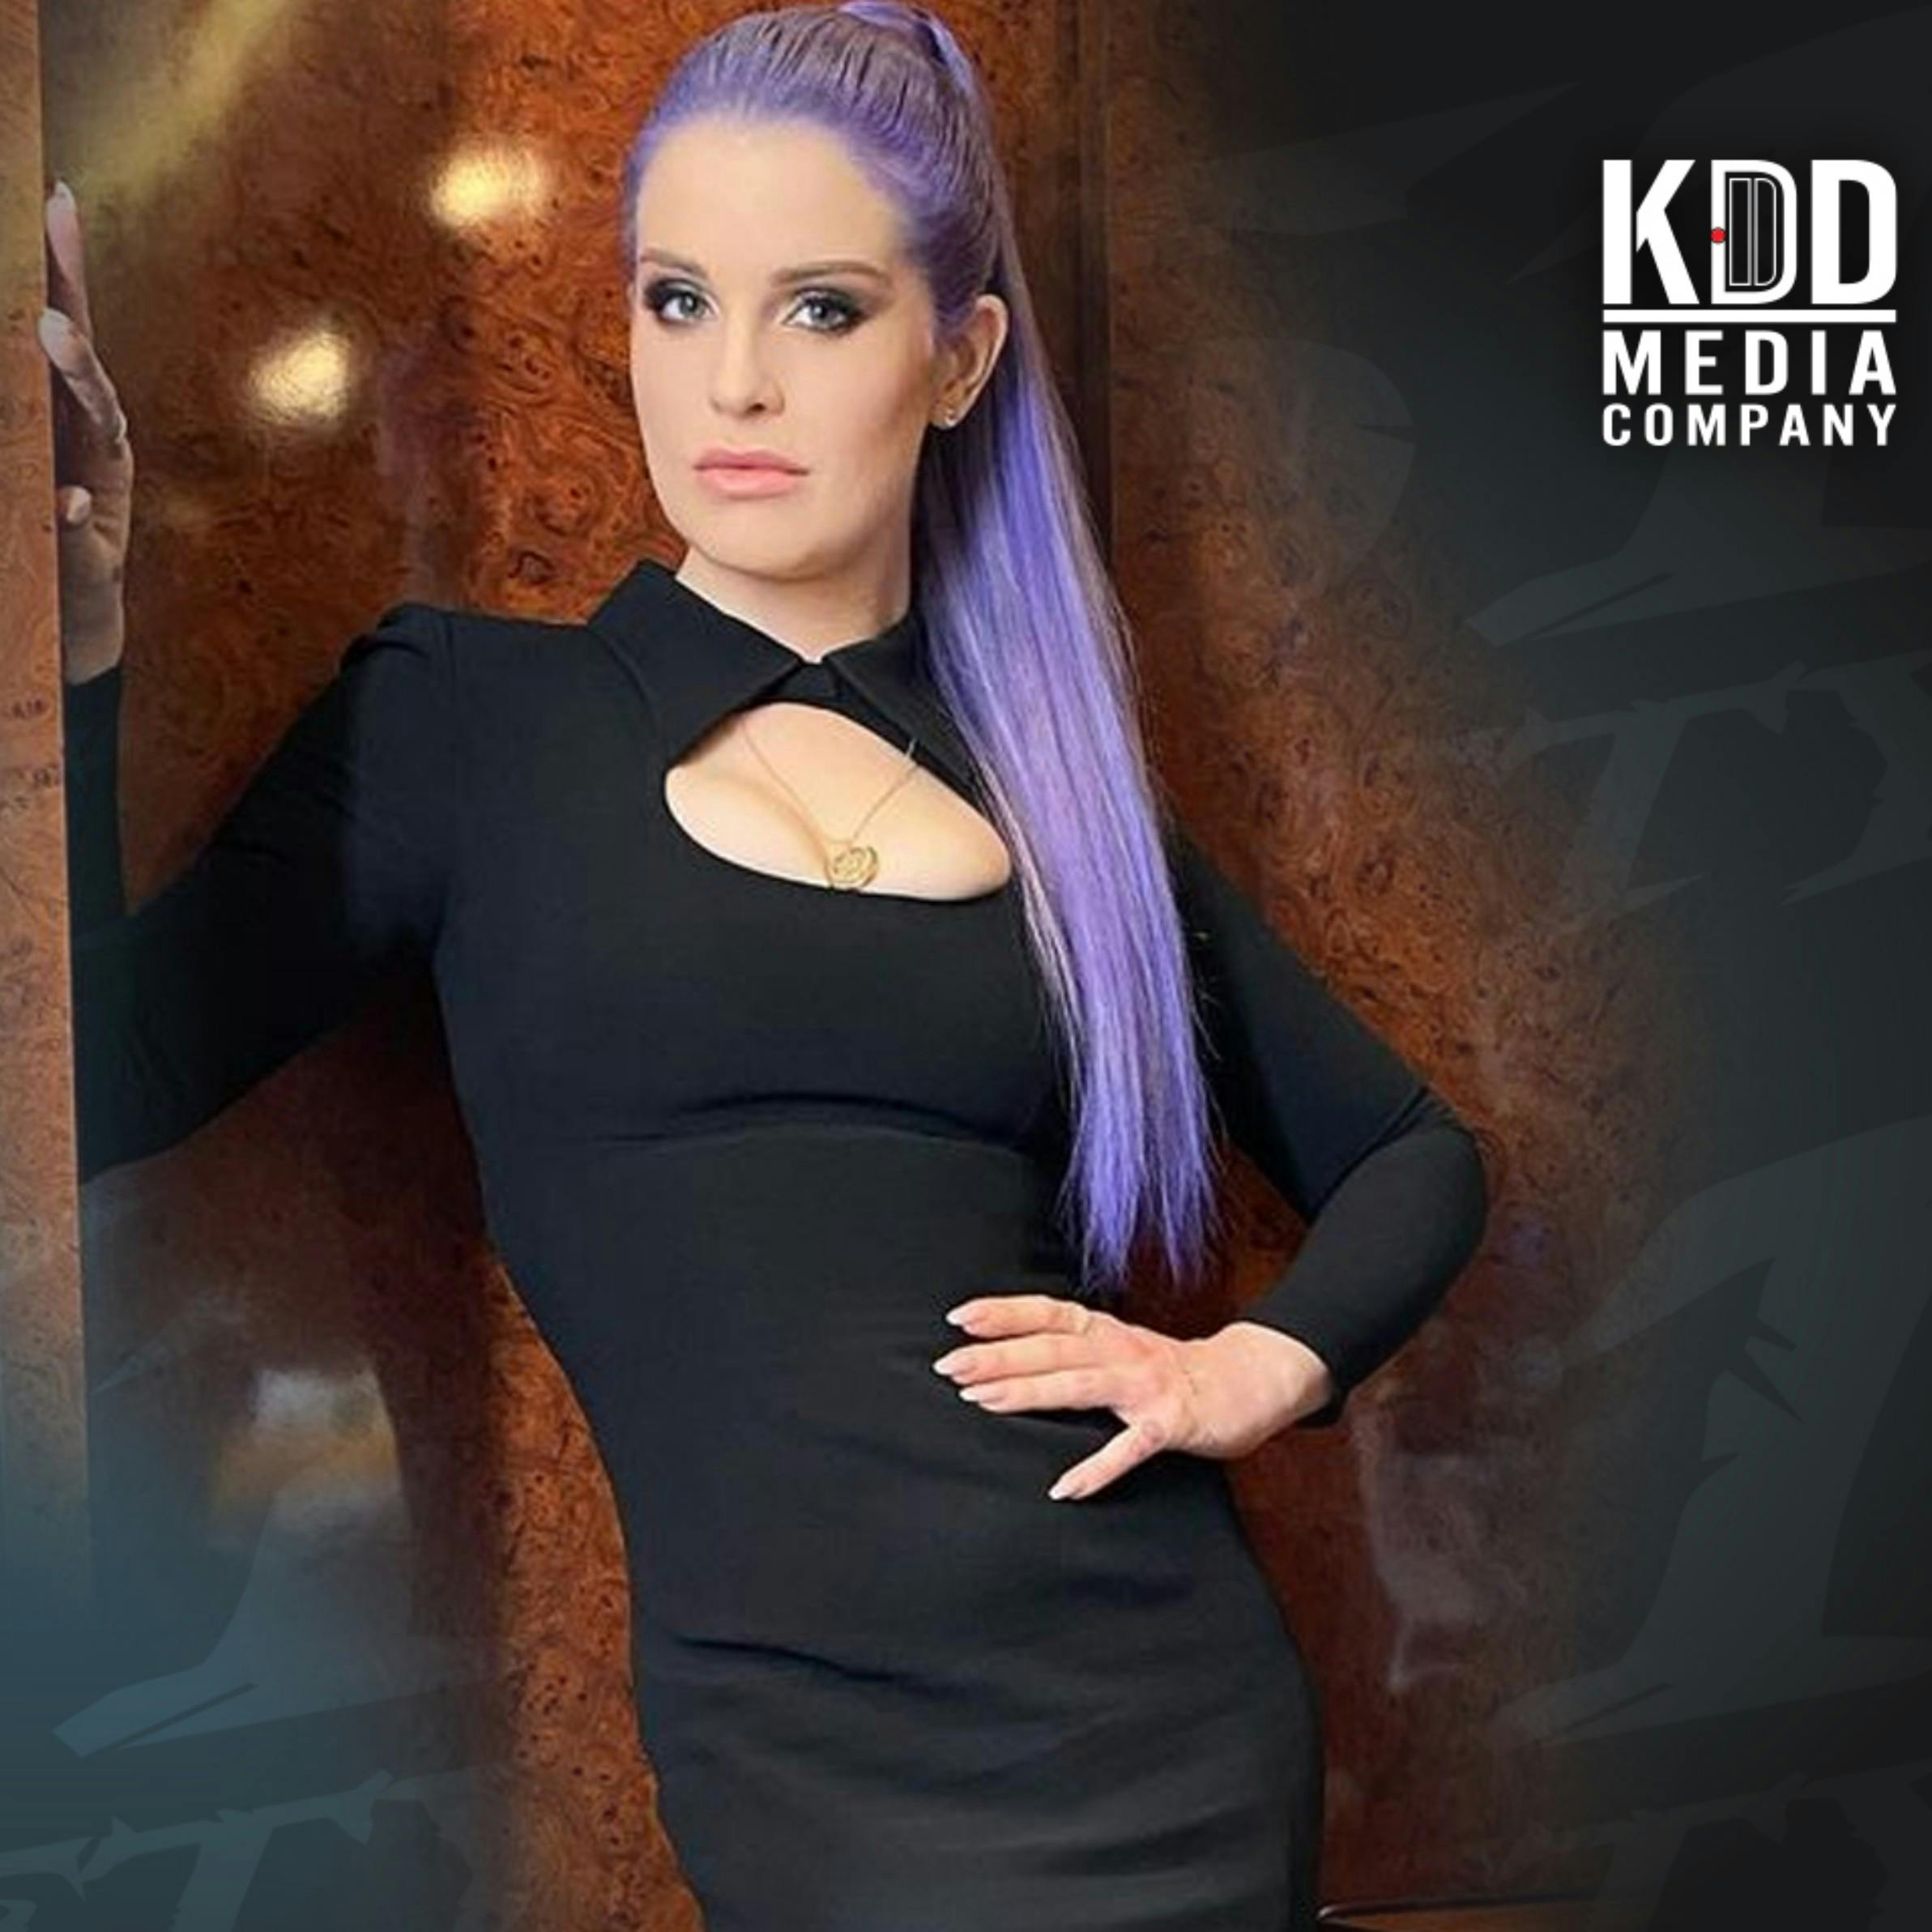 Kelly Osbourne | From Alcoholism & Substance Abuse to Sobriety, Redemption and Advocacy